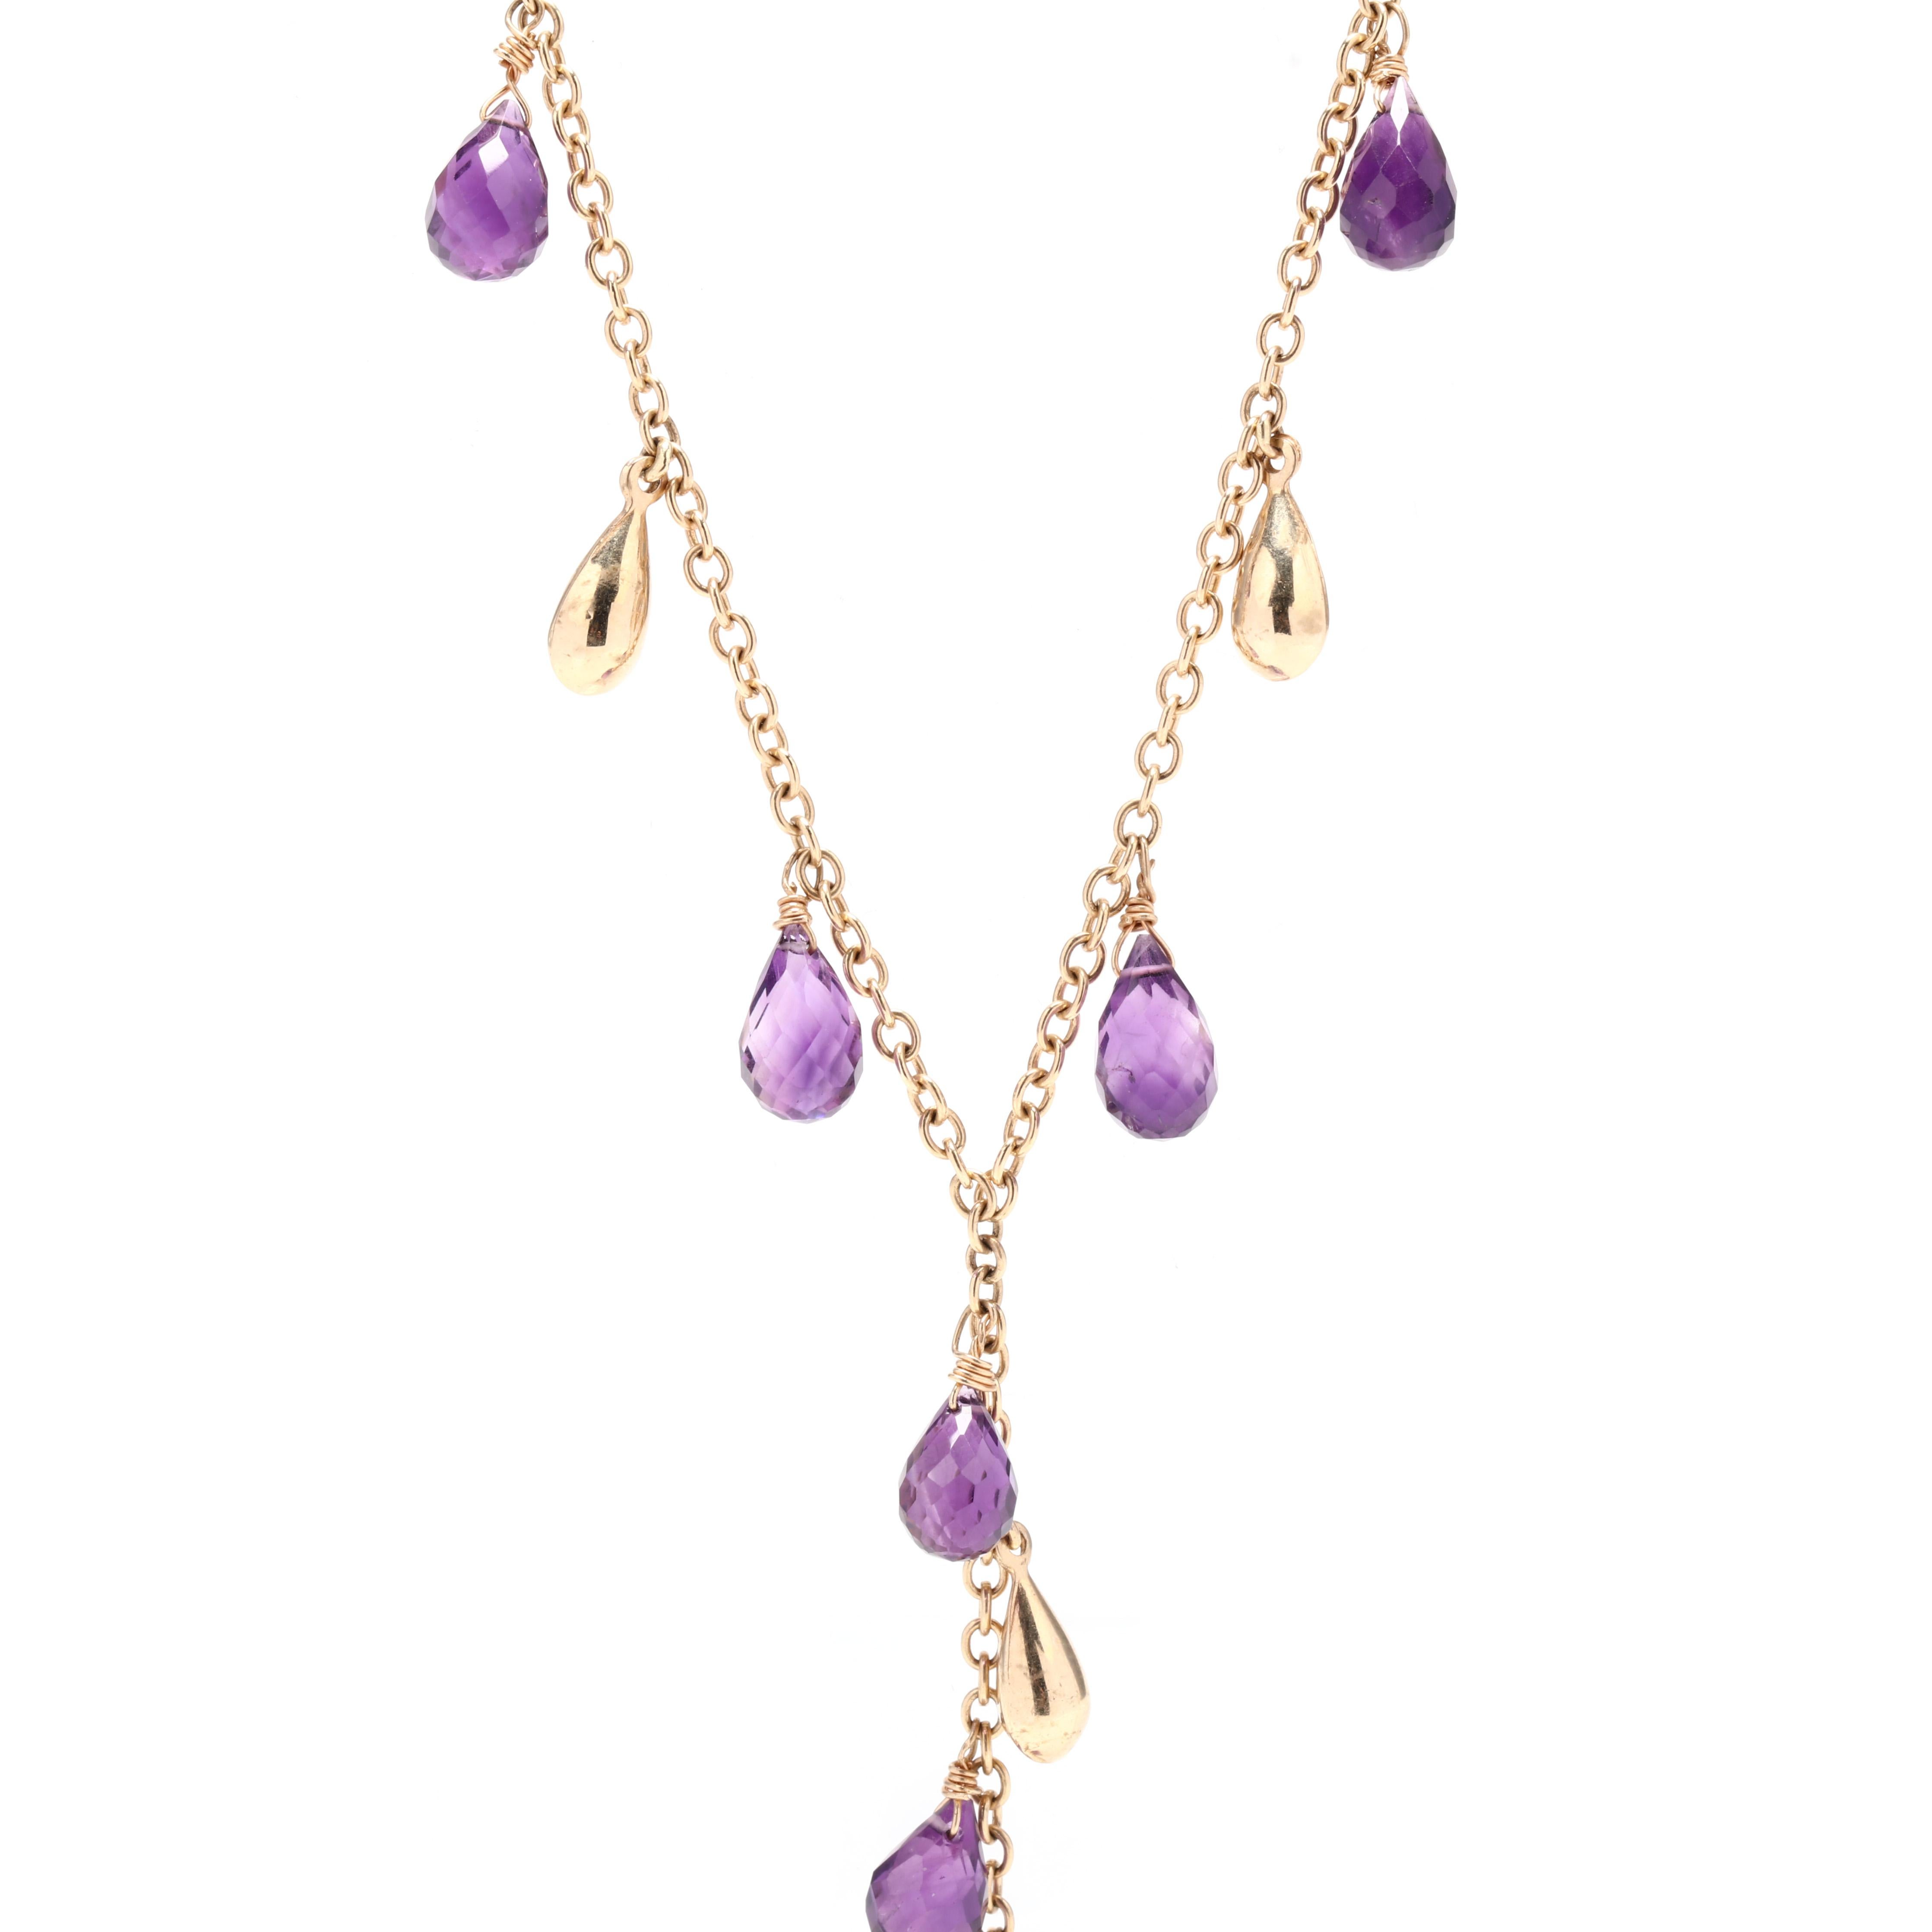 A vintage 14 karat yellow gold amethyst fringe lariat necklace. This necklace features gold teardrop bead and amethyst briolette dangles in a lariat motif suspended from a cable chain.



Stones:

- amethyst, 11 stones

- teardrop briolette

- 8.5 x